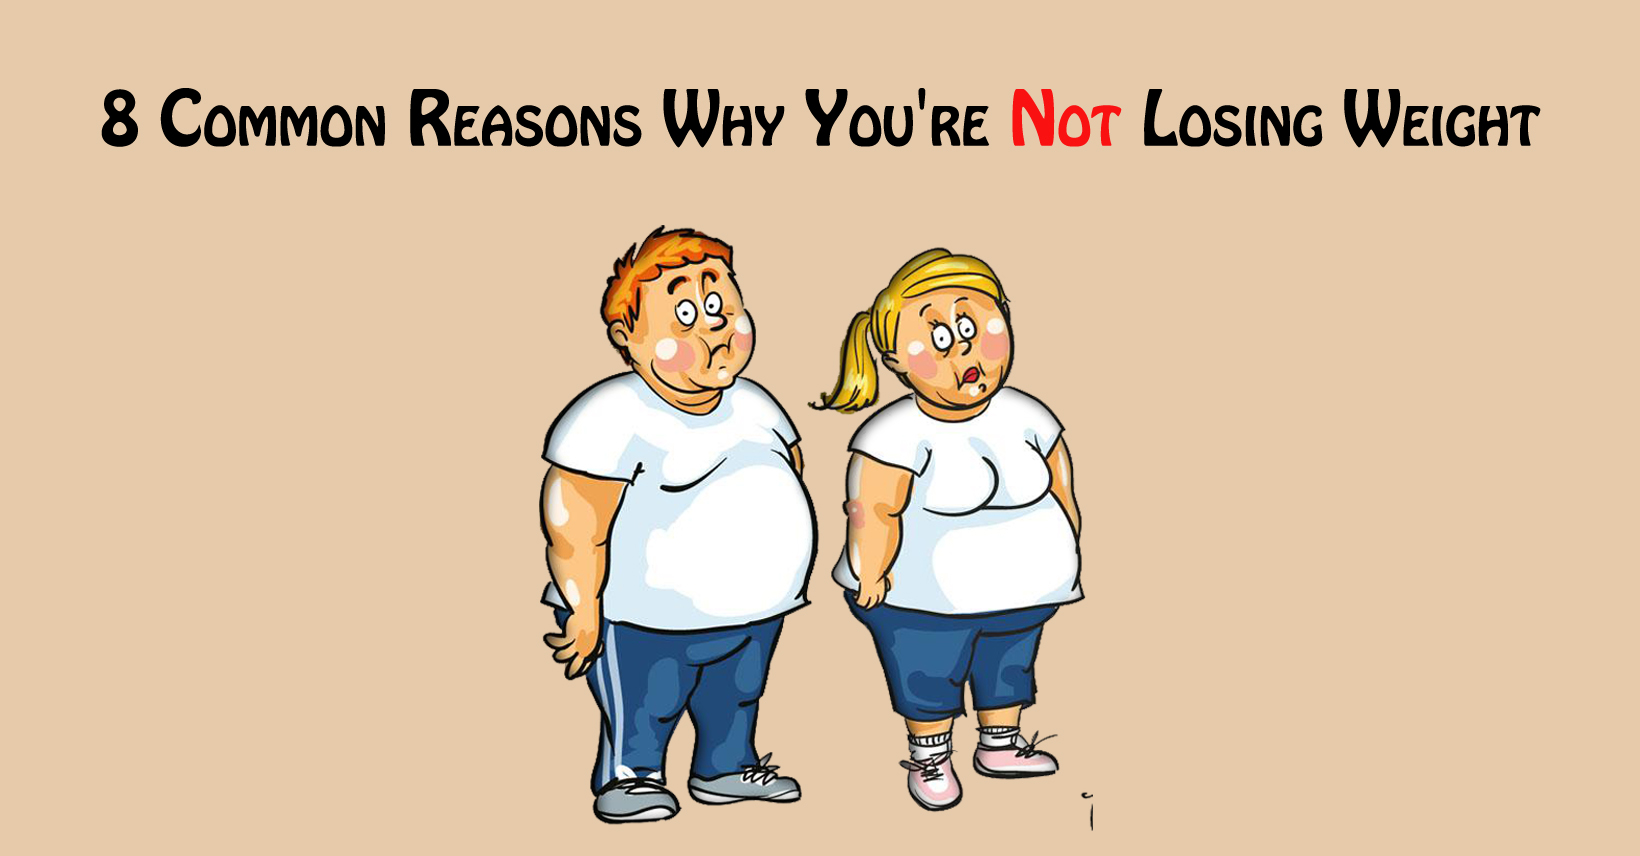 8 Common Reasons Why You're Not Losing Weight